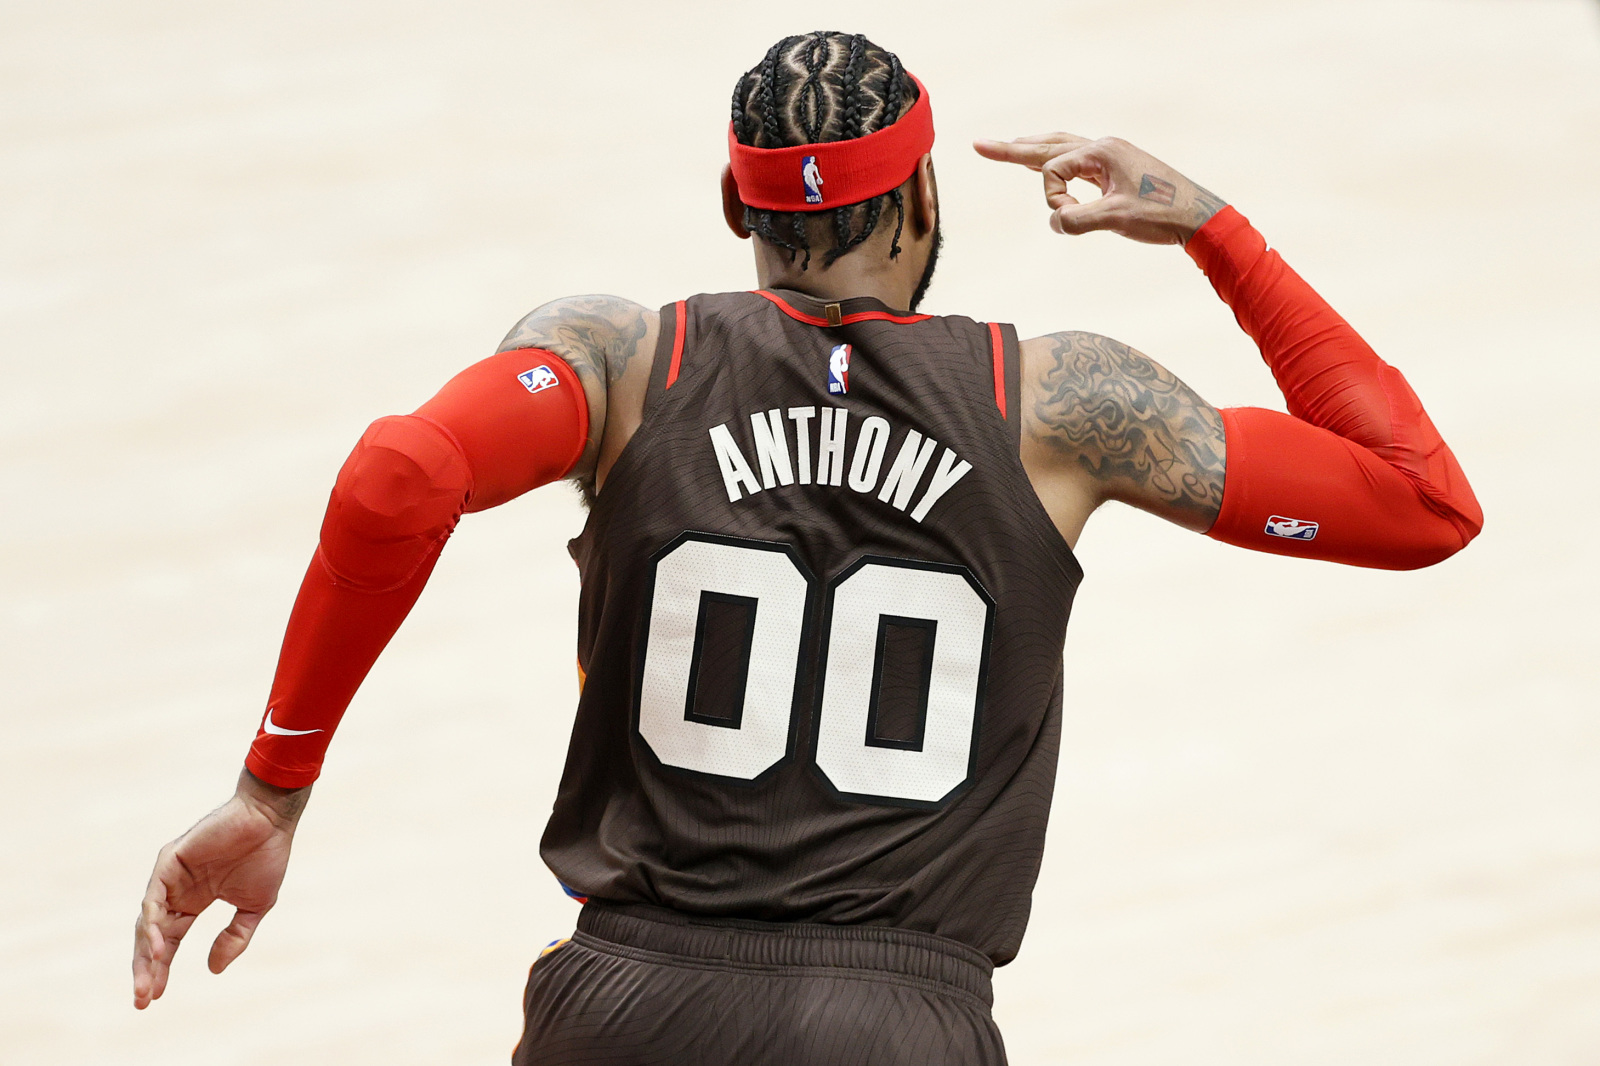 What kind of impact has Carmelo Anthony had on the Portland Trail